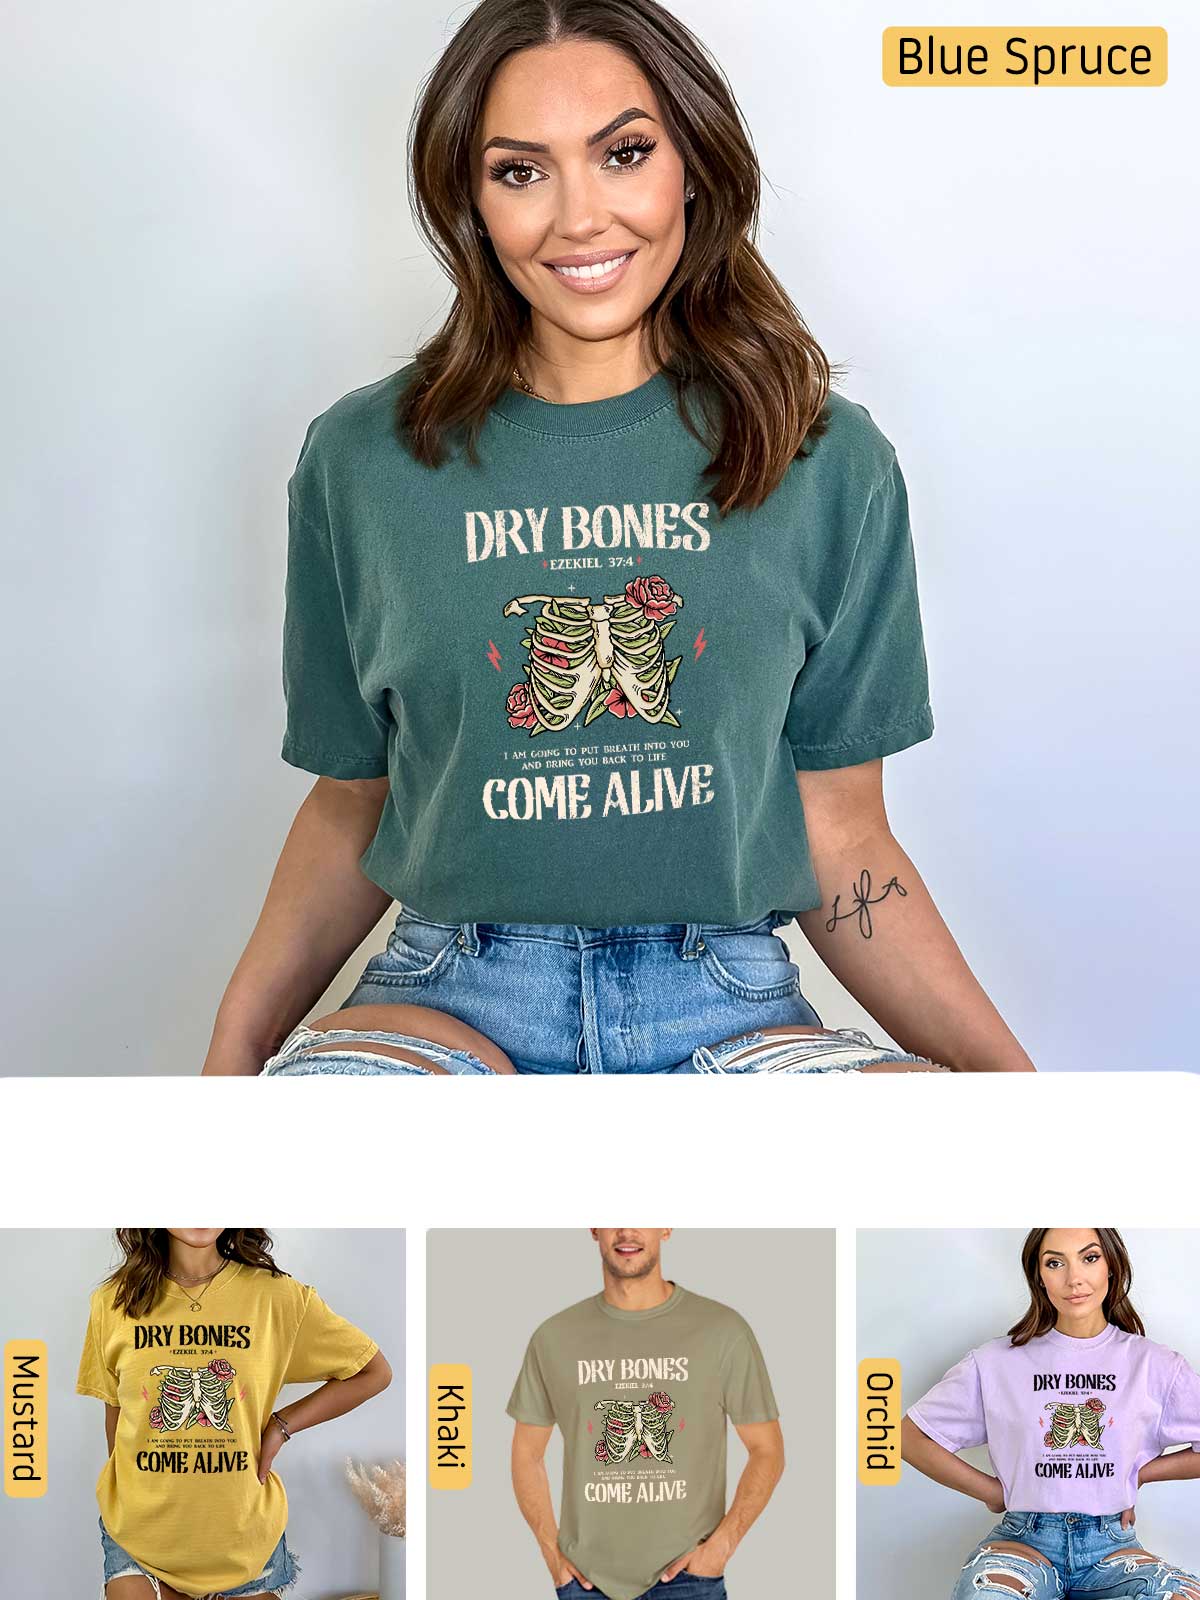 a woman wearing a shirt that says dry bones come alive